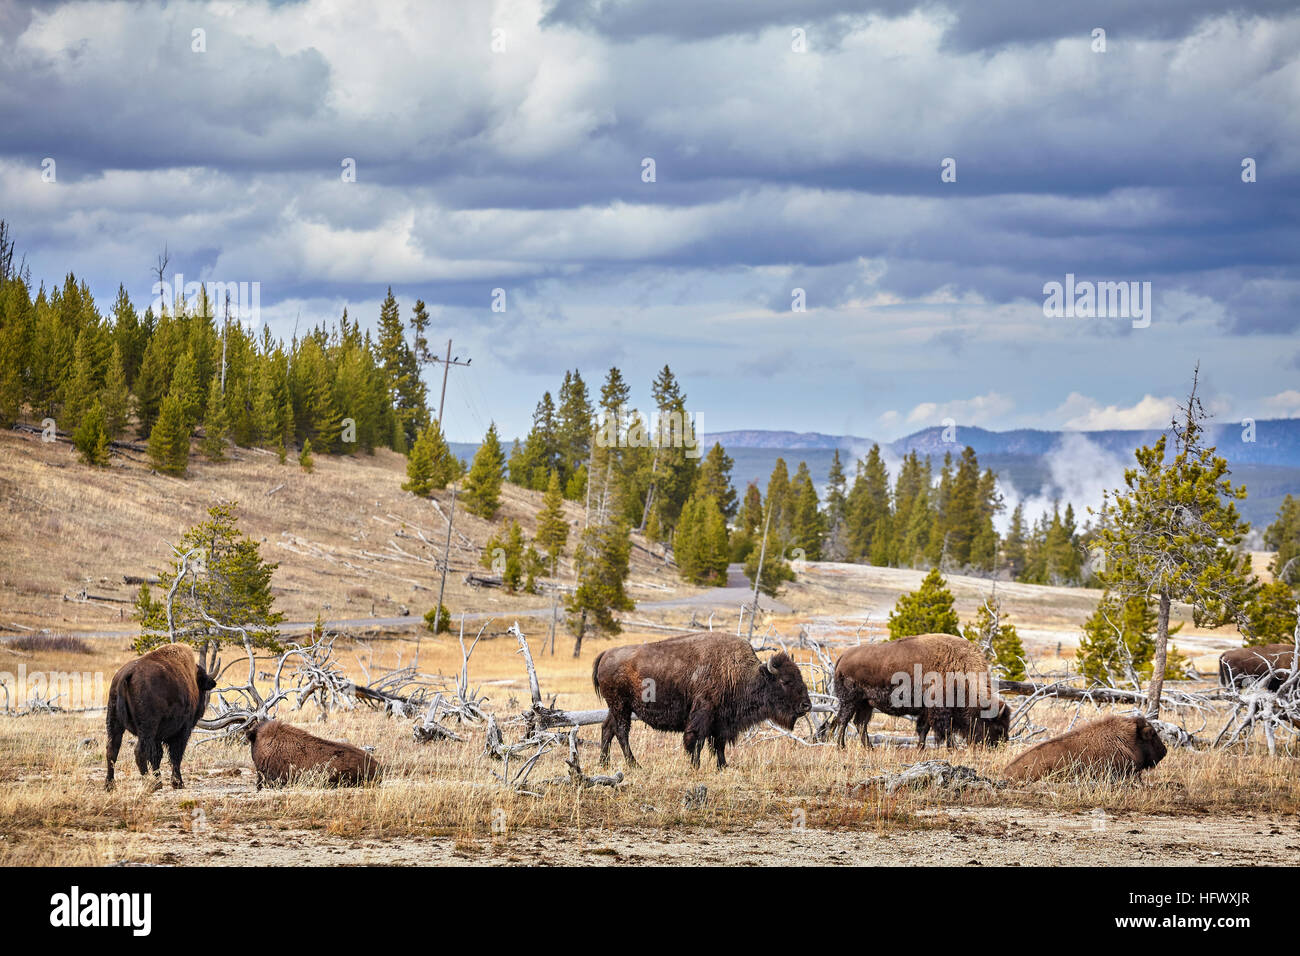 Herd of American bison (Bison bison) grazing in Yellowstone National Park, Wyoming, USA. Stock Photo